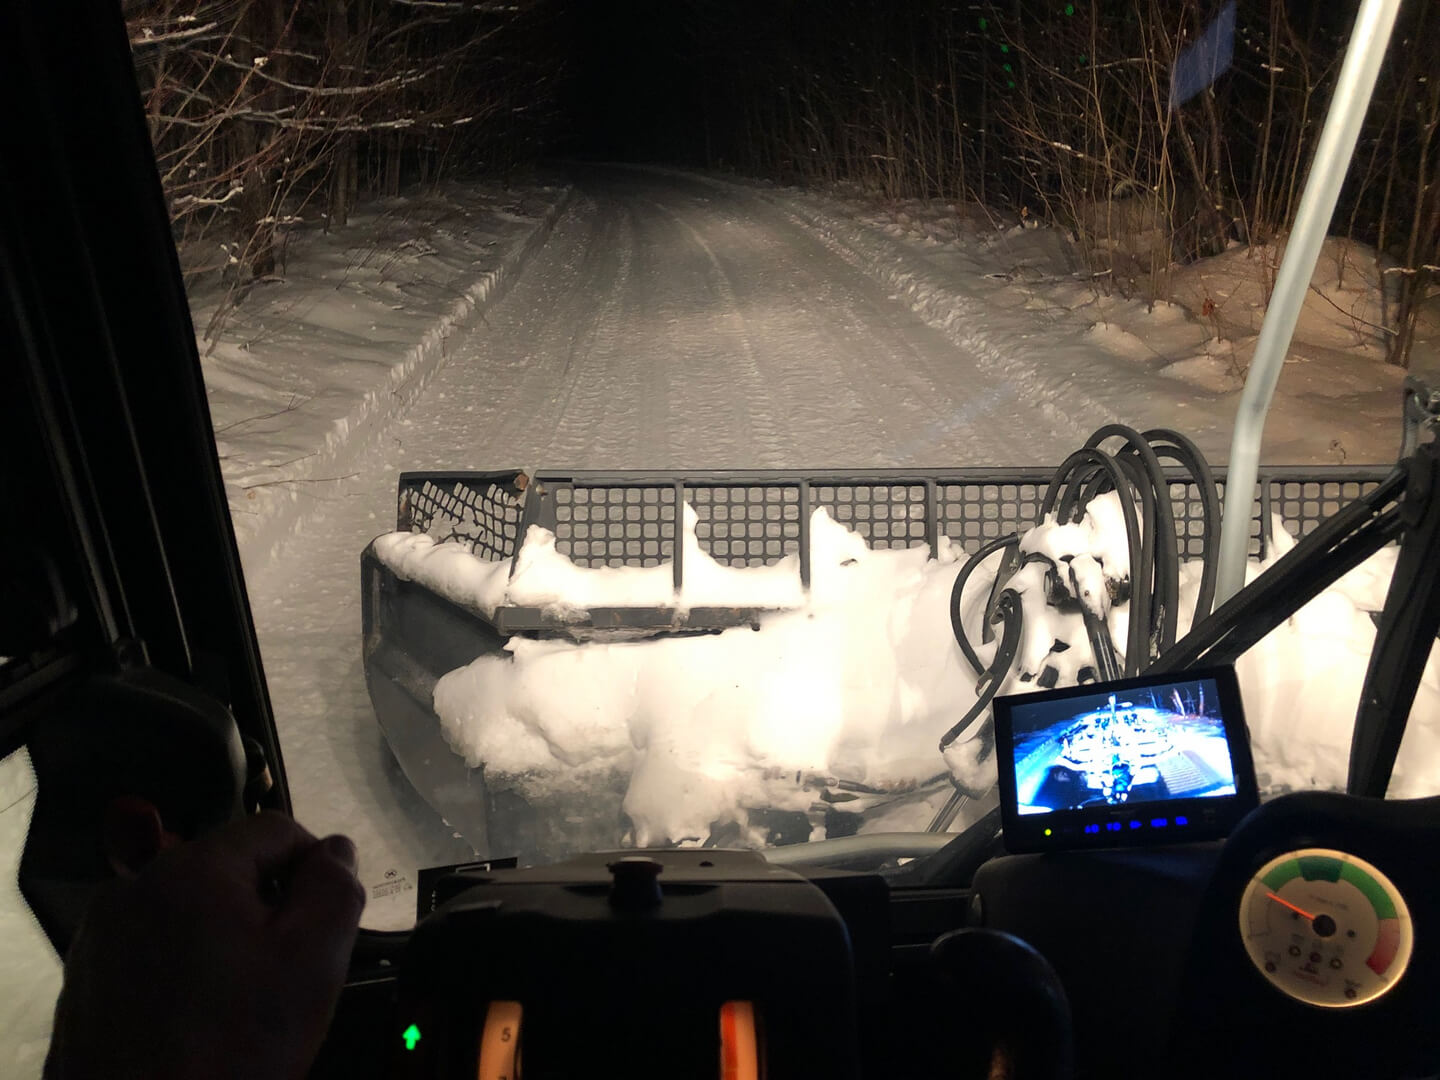 A view from the back of a vehicle as it drives down a snowy road.